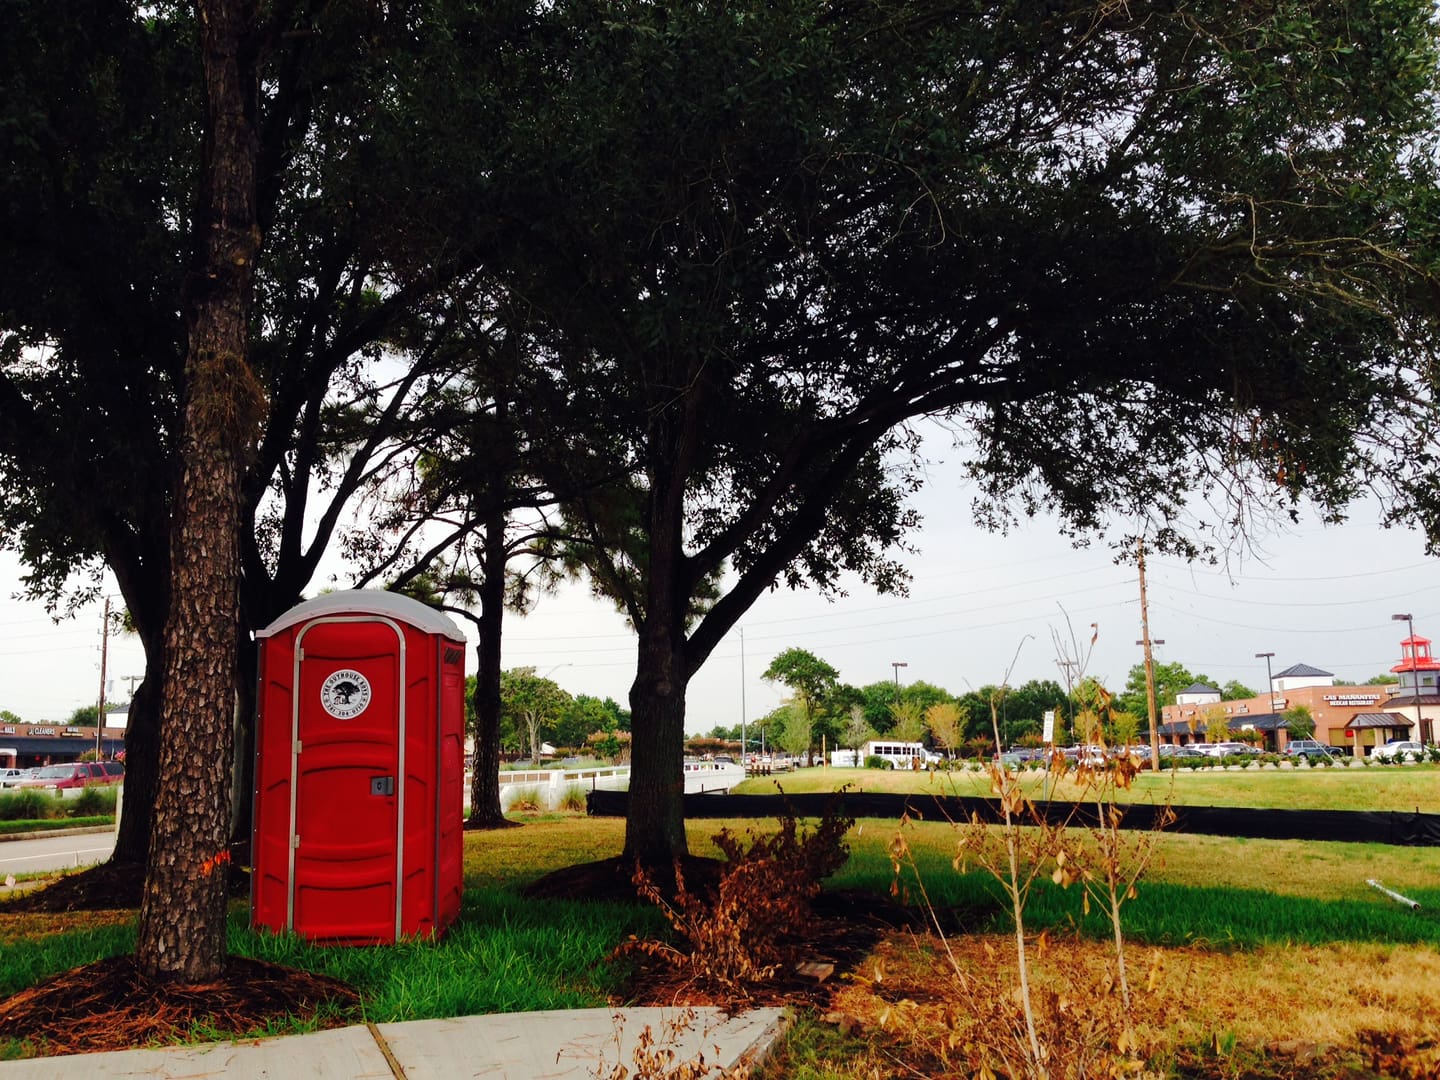 A red toilet sitting in the middle of a park.